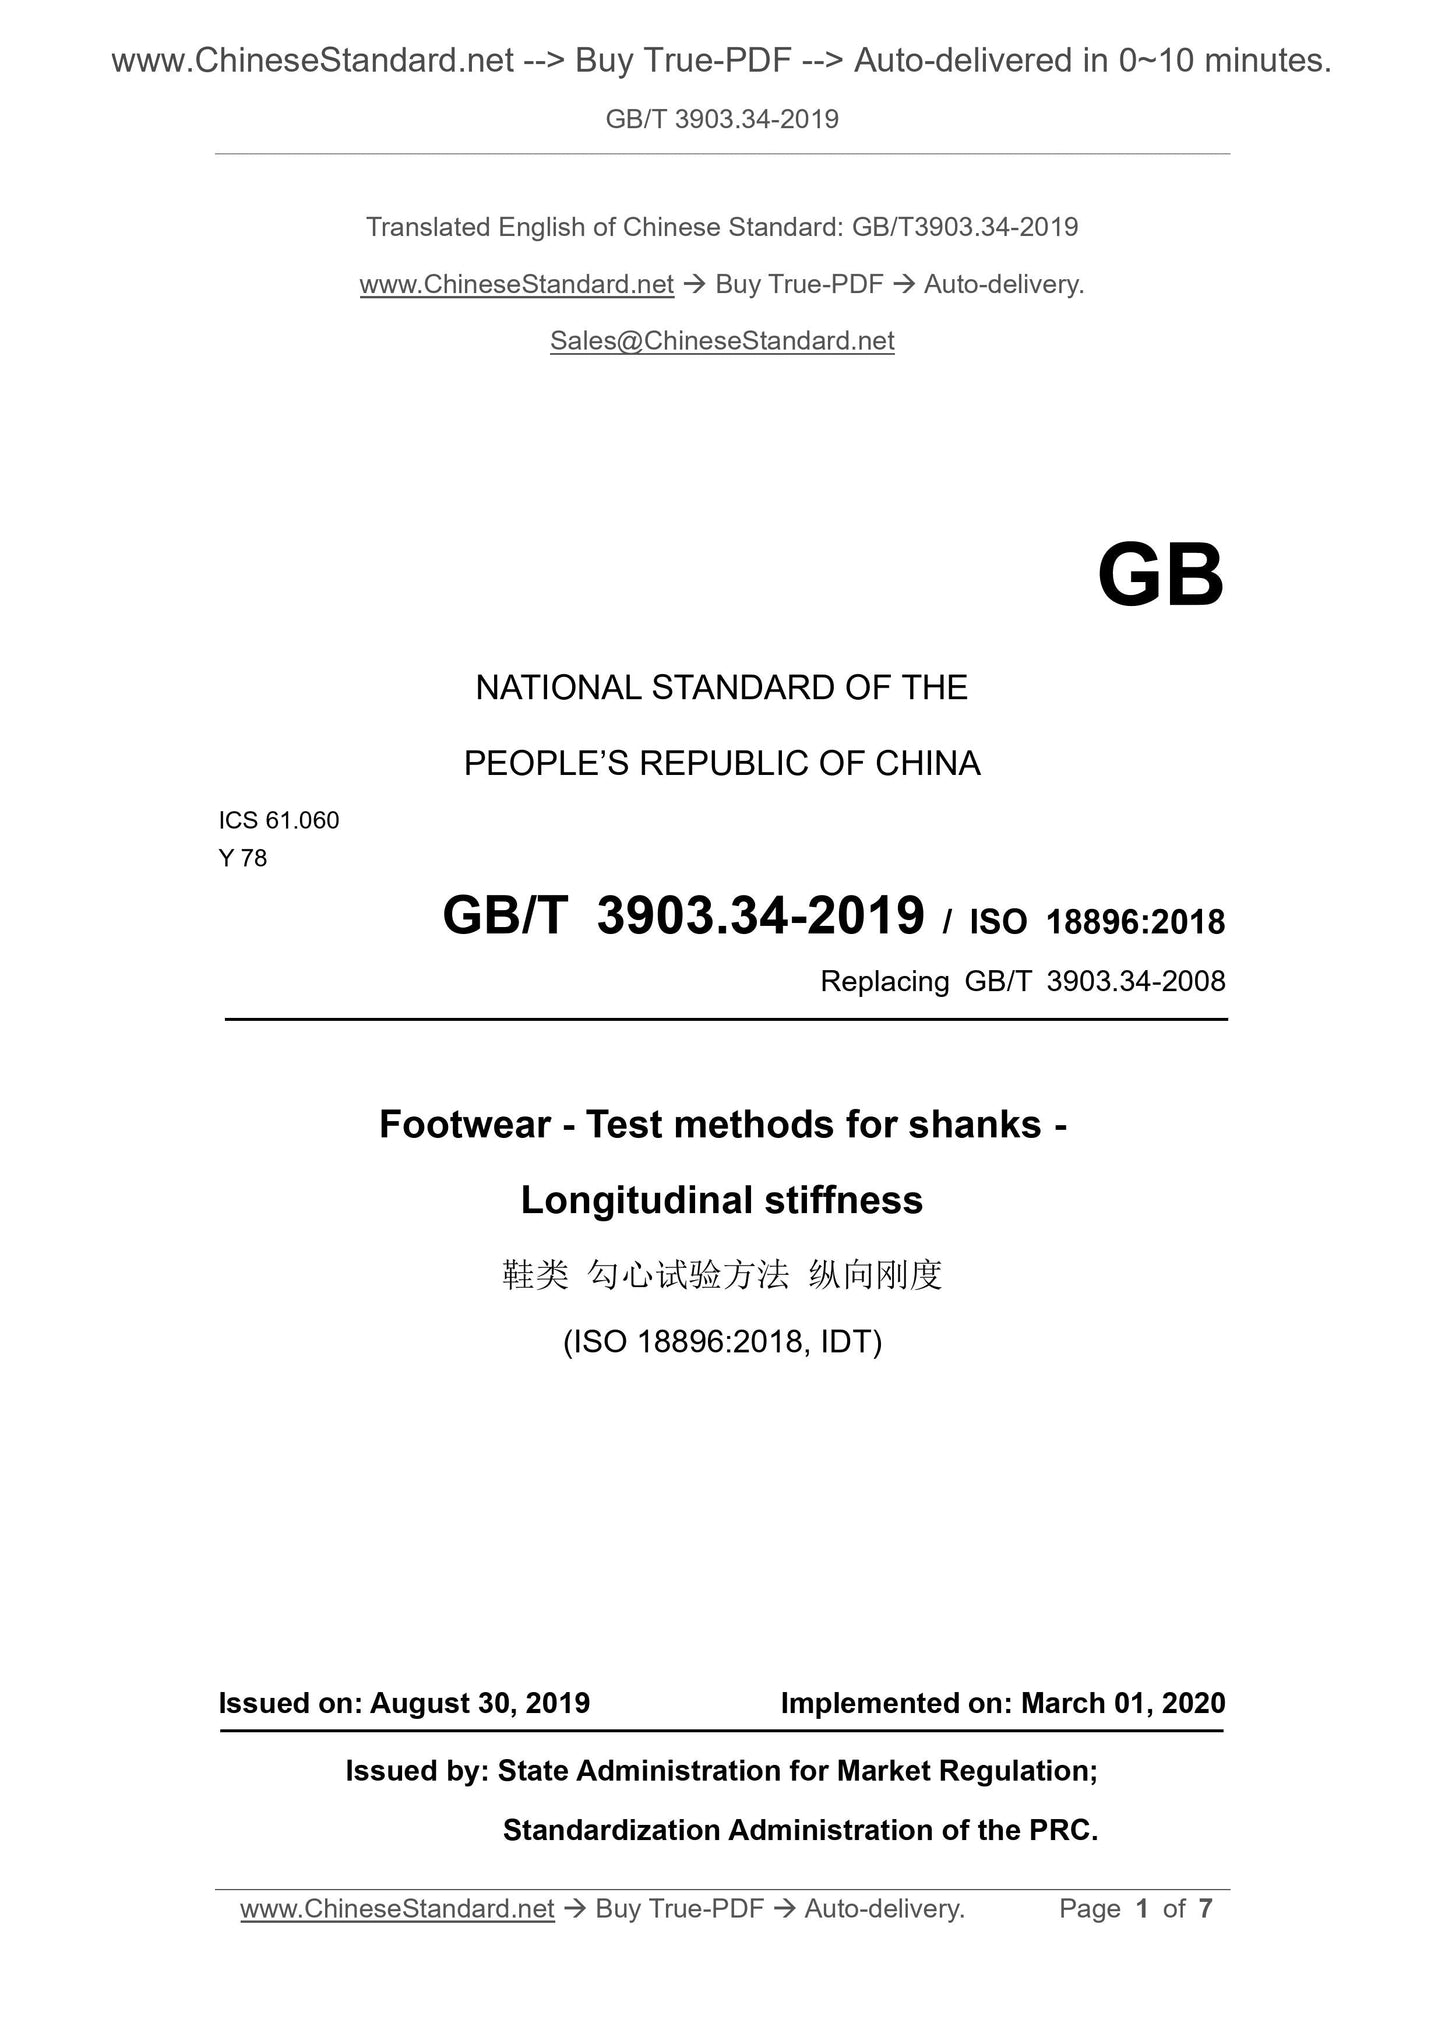 GB/T 3903.34-2019 Page 1